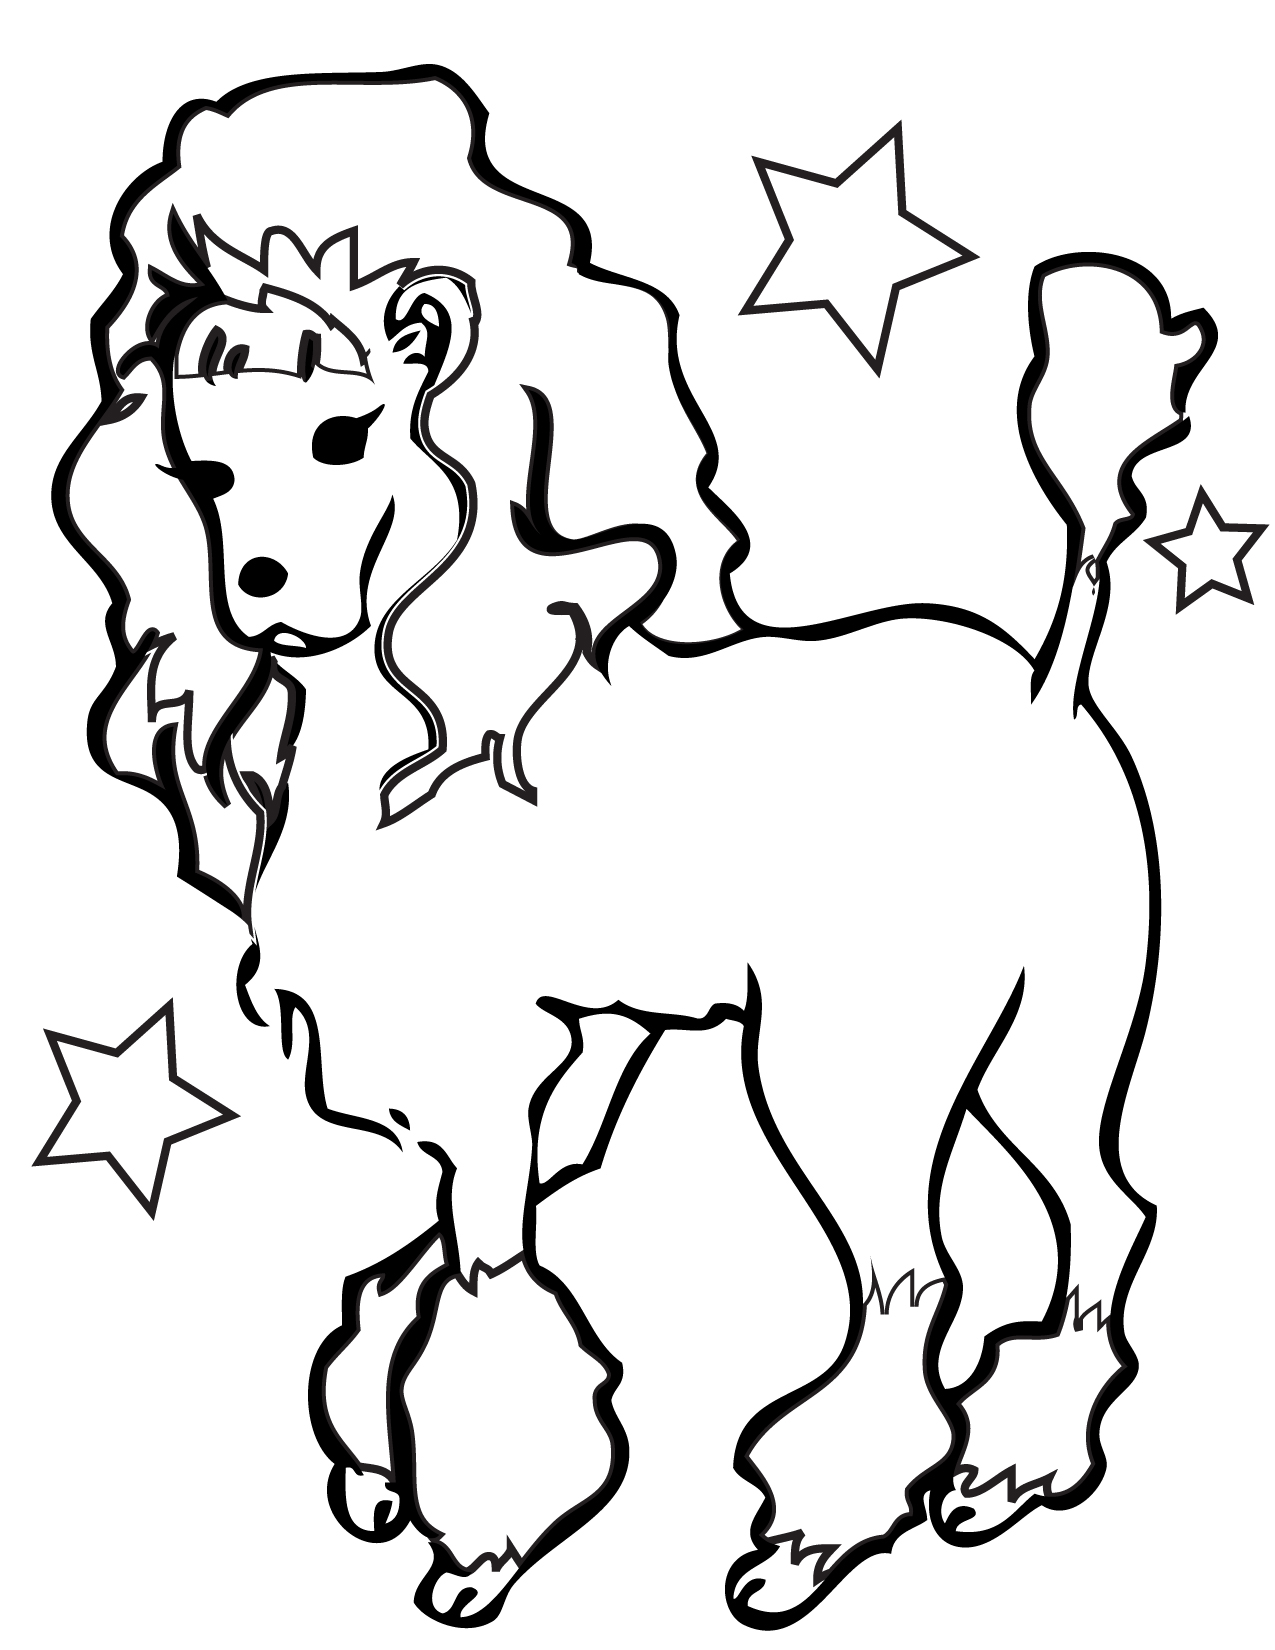 Clifford Coloring Pages To Print Dog Template For Colouring ...